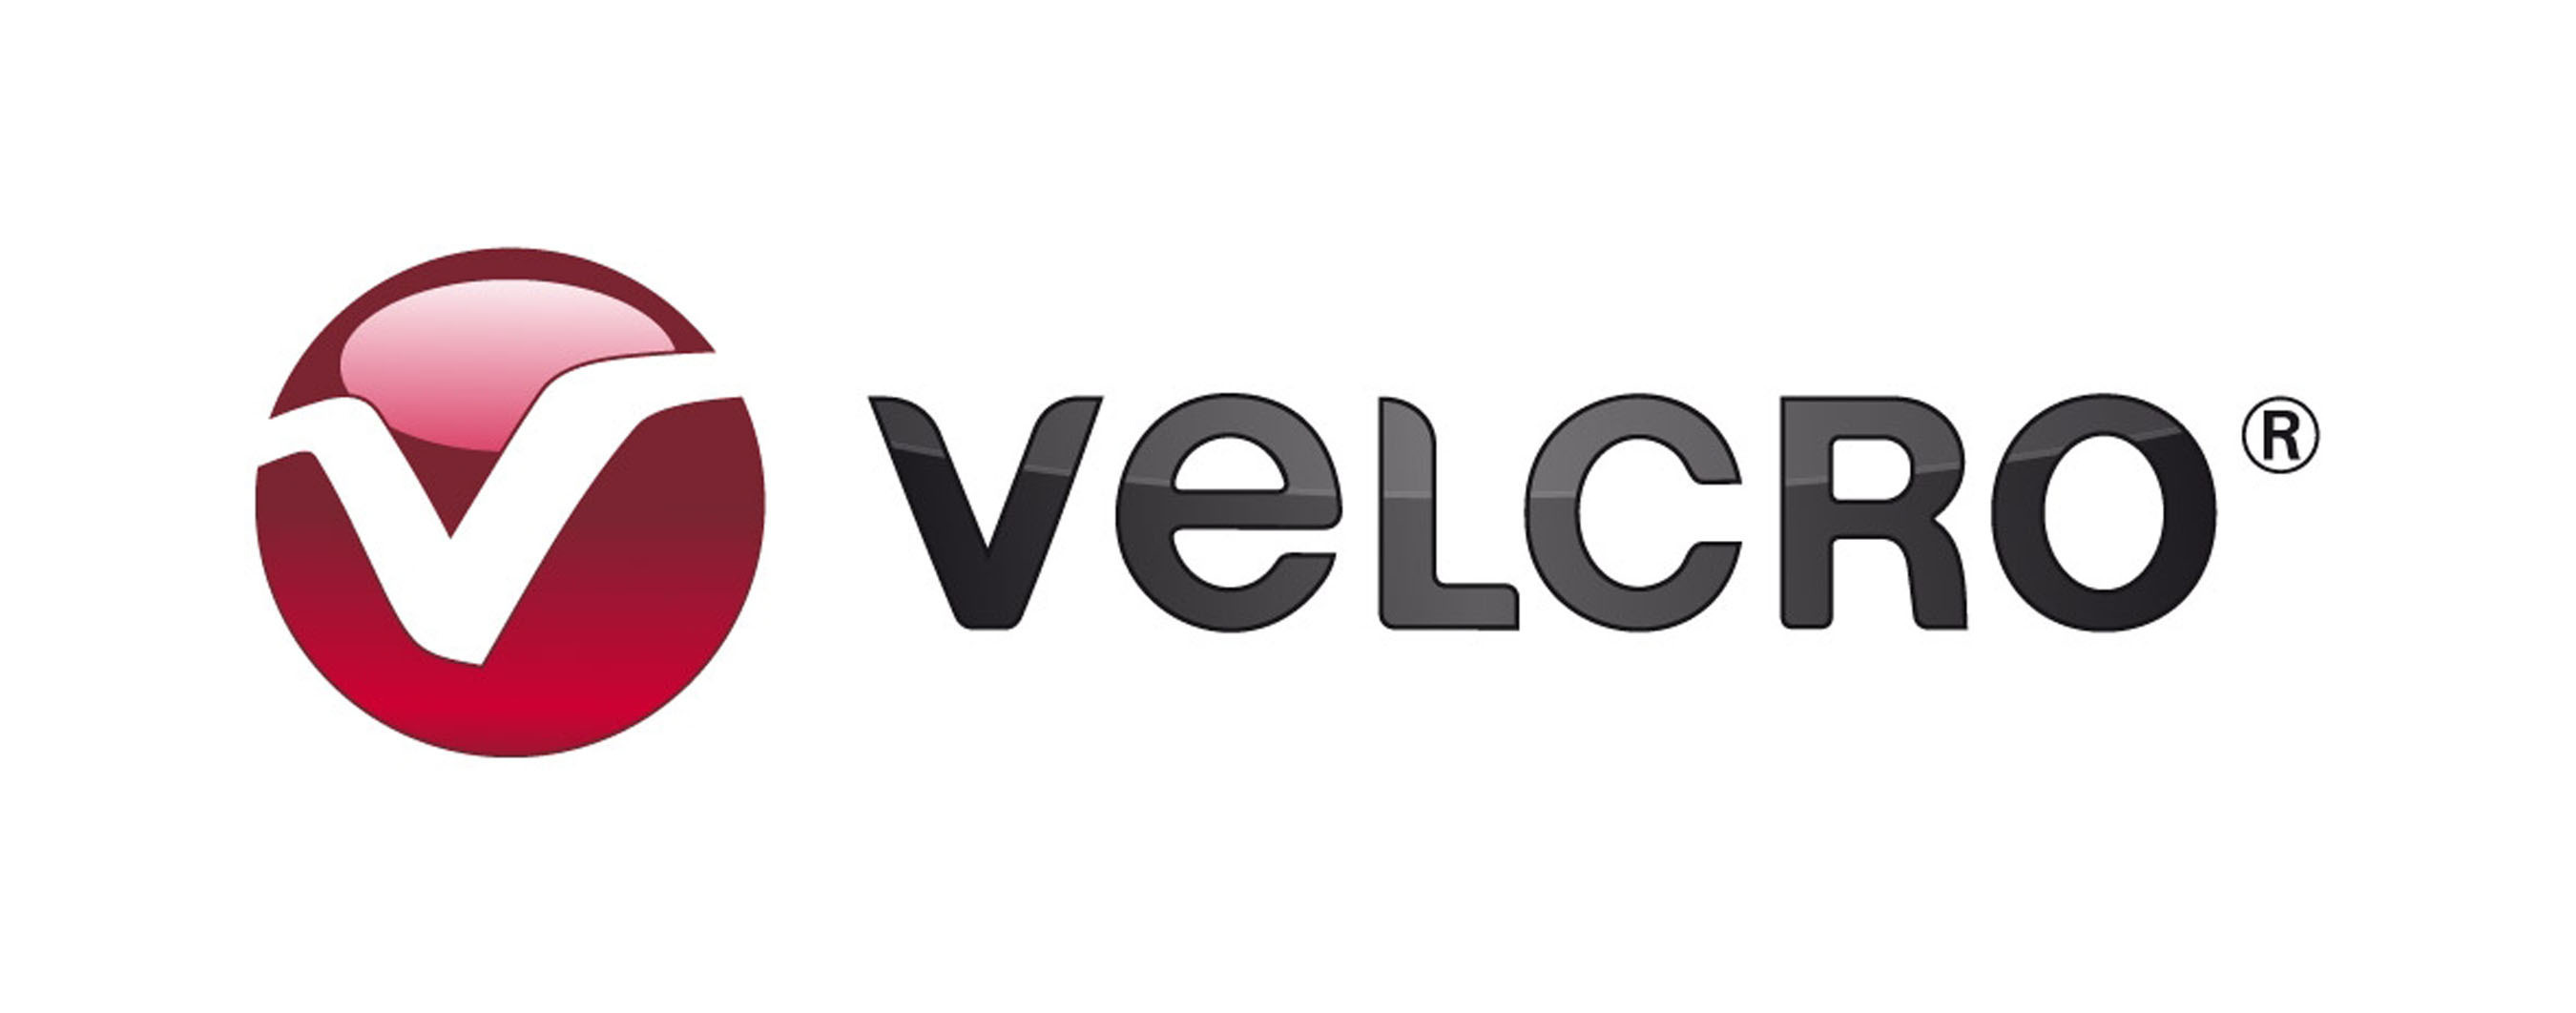 The Velcro Companies Hook Up With A New Corporate Identity